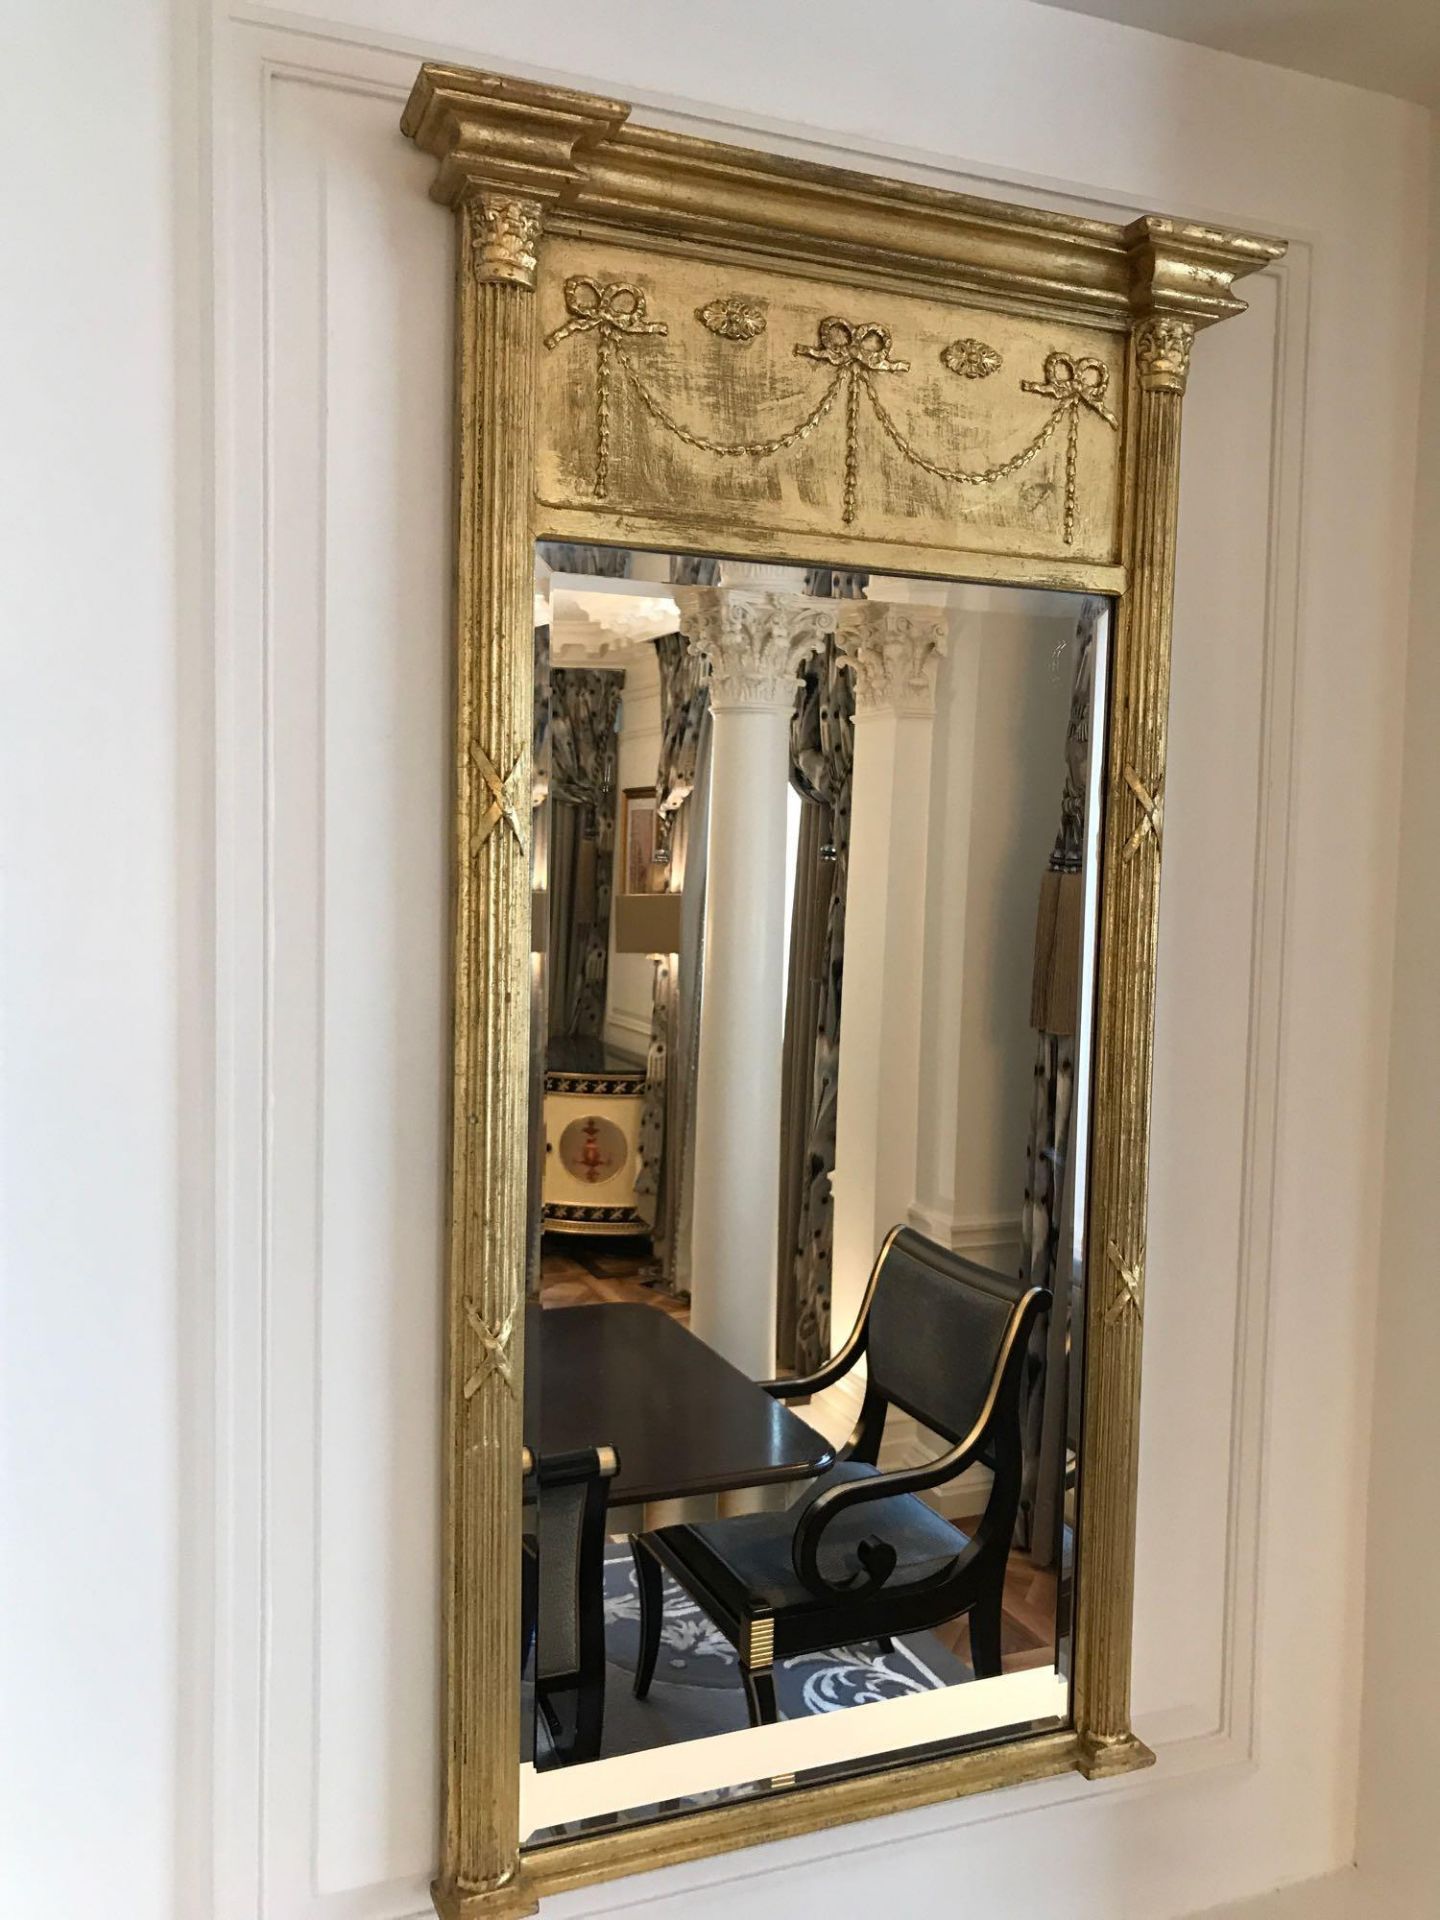 Regency Style Giltwood Pier Mirror Flanked By Spirally-Turned Half Pilasters The Frieze With